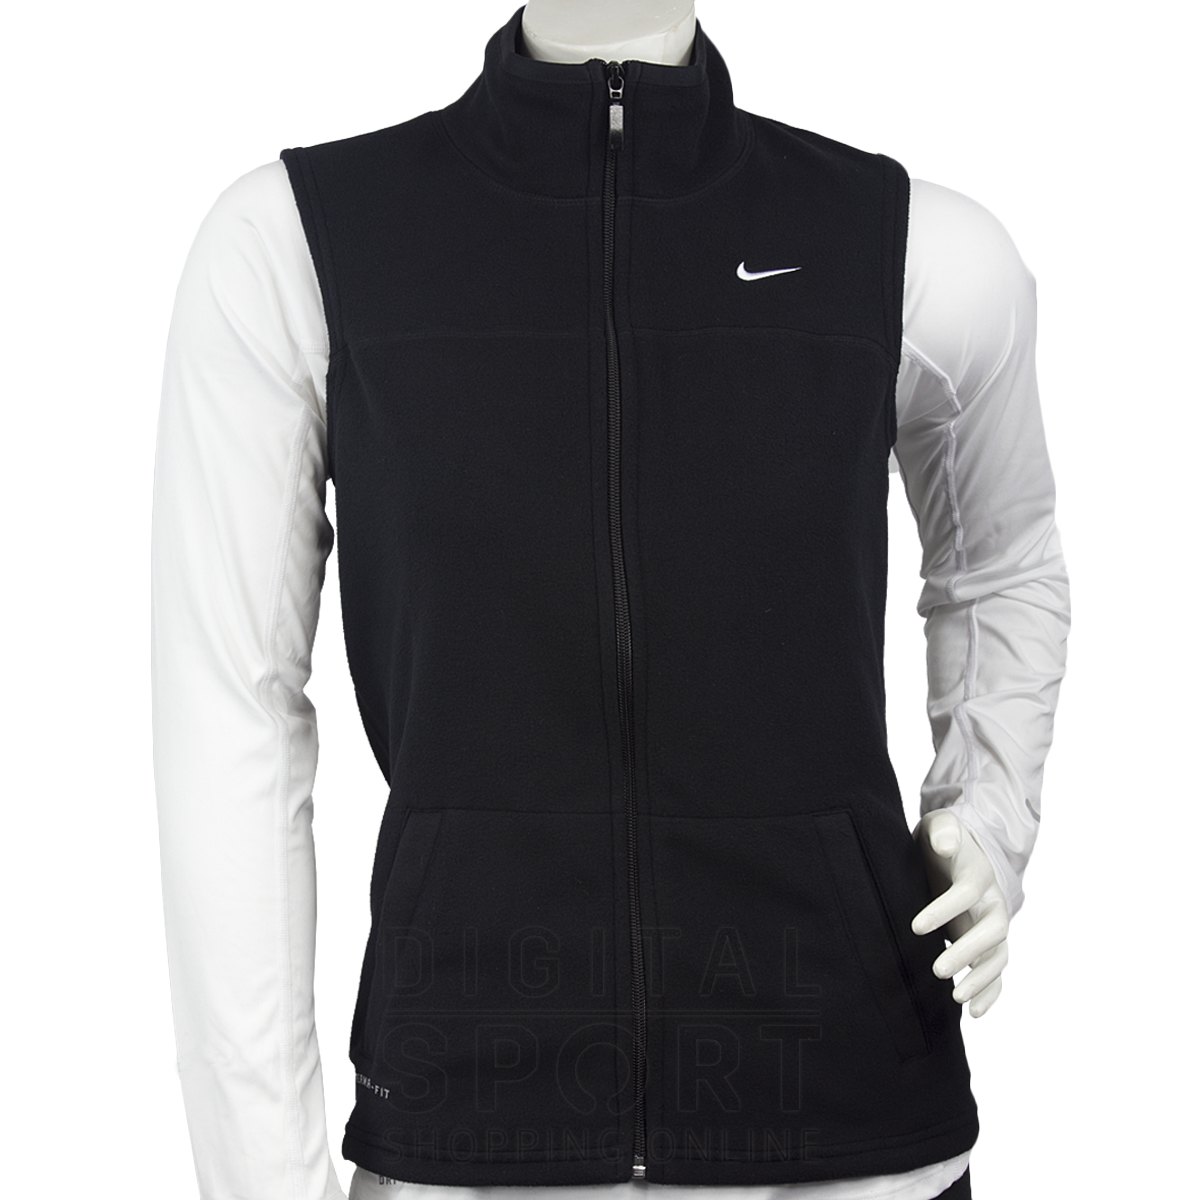 CHALECO THERMAL NEGRO NIKE | SPORT 78